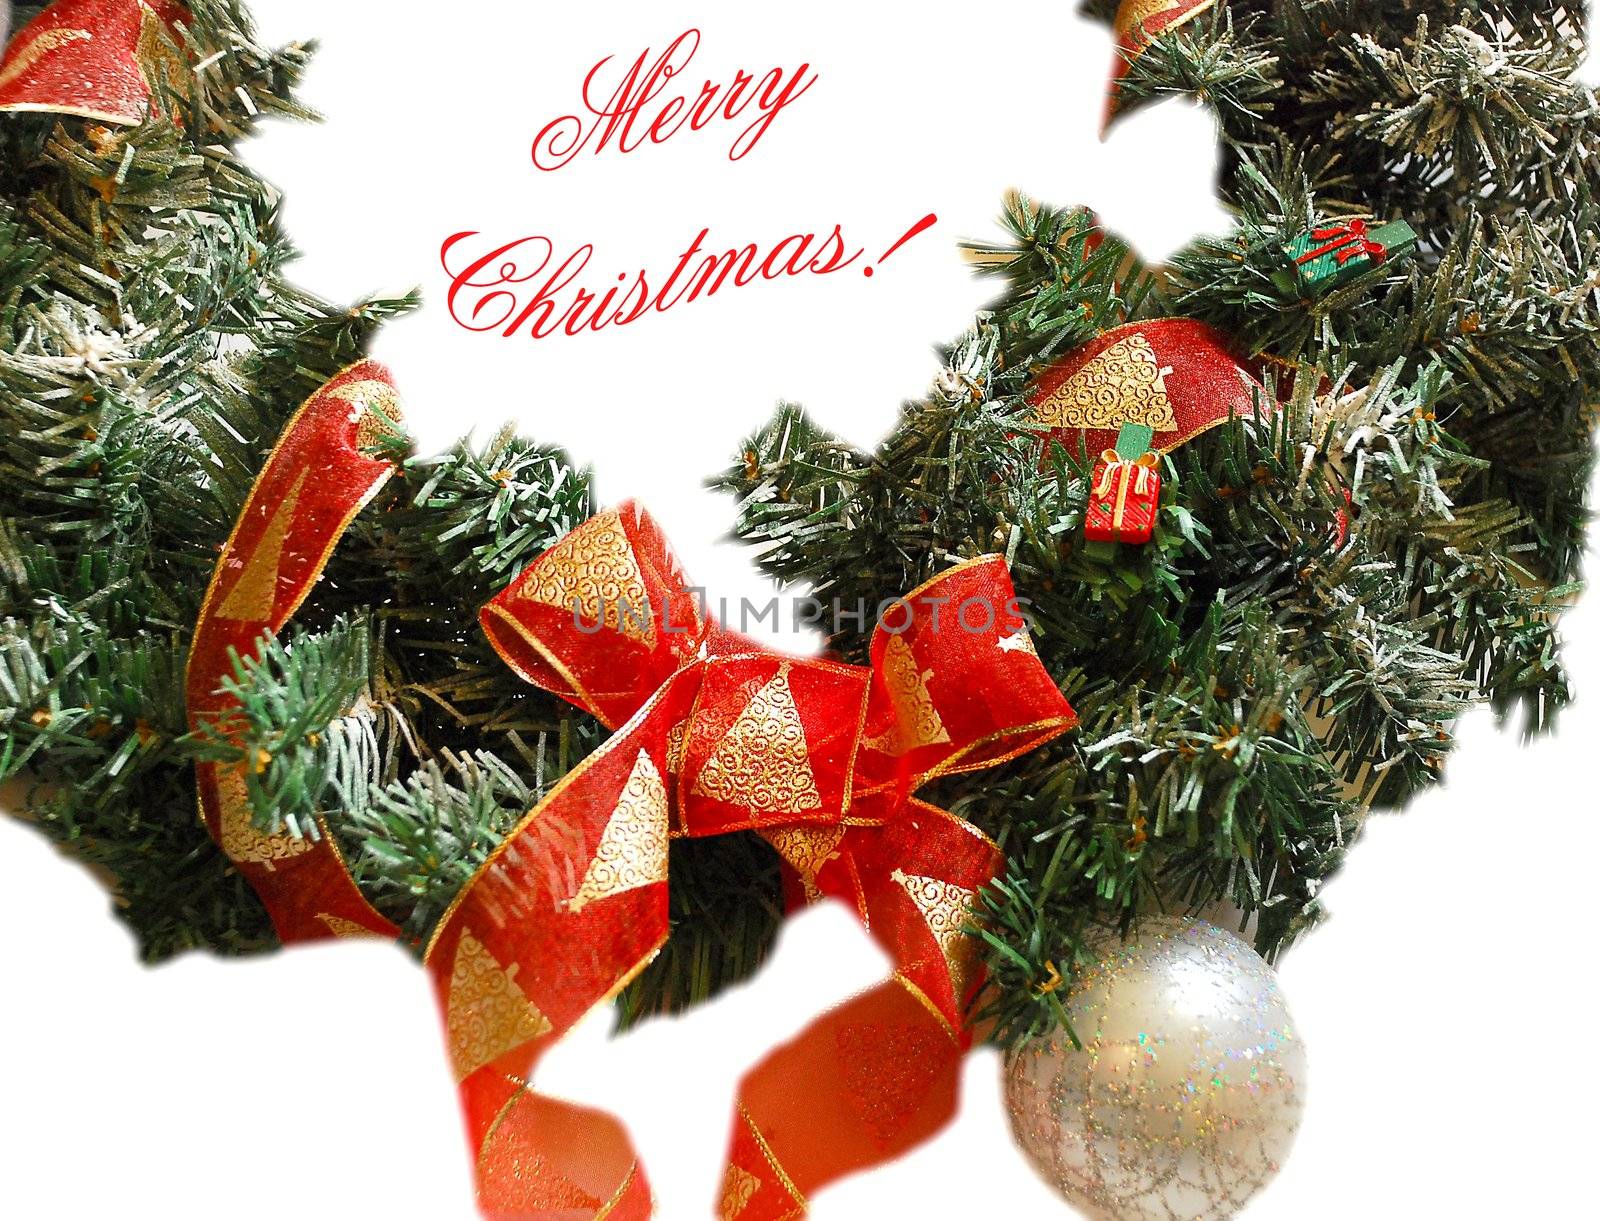 A decorated twig of fir, with red and gold band and little gifts, nd a ball. The background is white and it's written " Merry Christmas!".